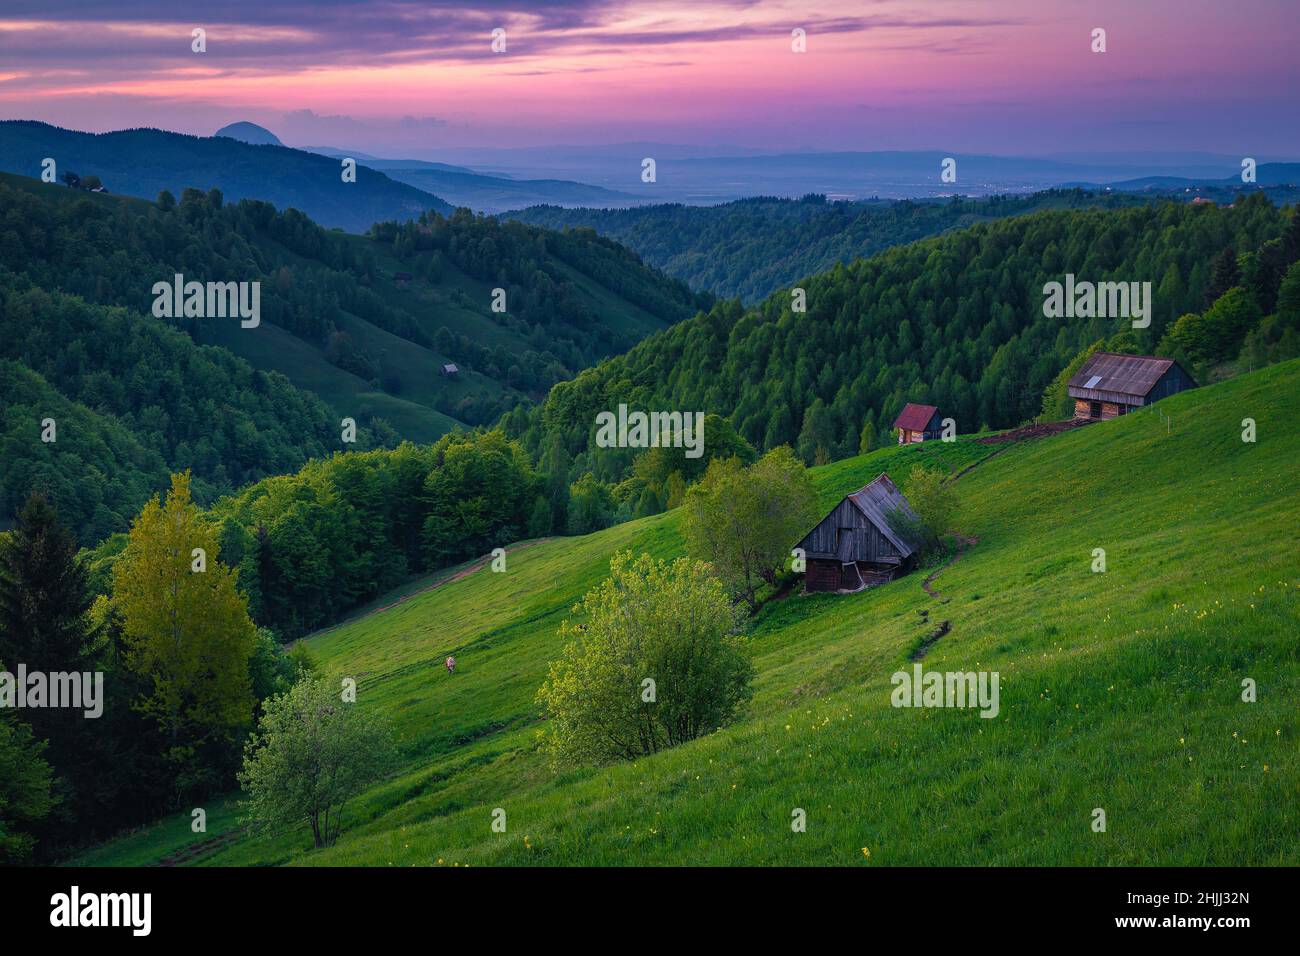 Wooden huts on the hill in the wilderness. Countryside landscape at sunset, Transylvania, Romania, Europe Stock Photo